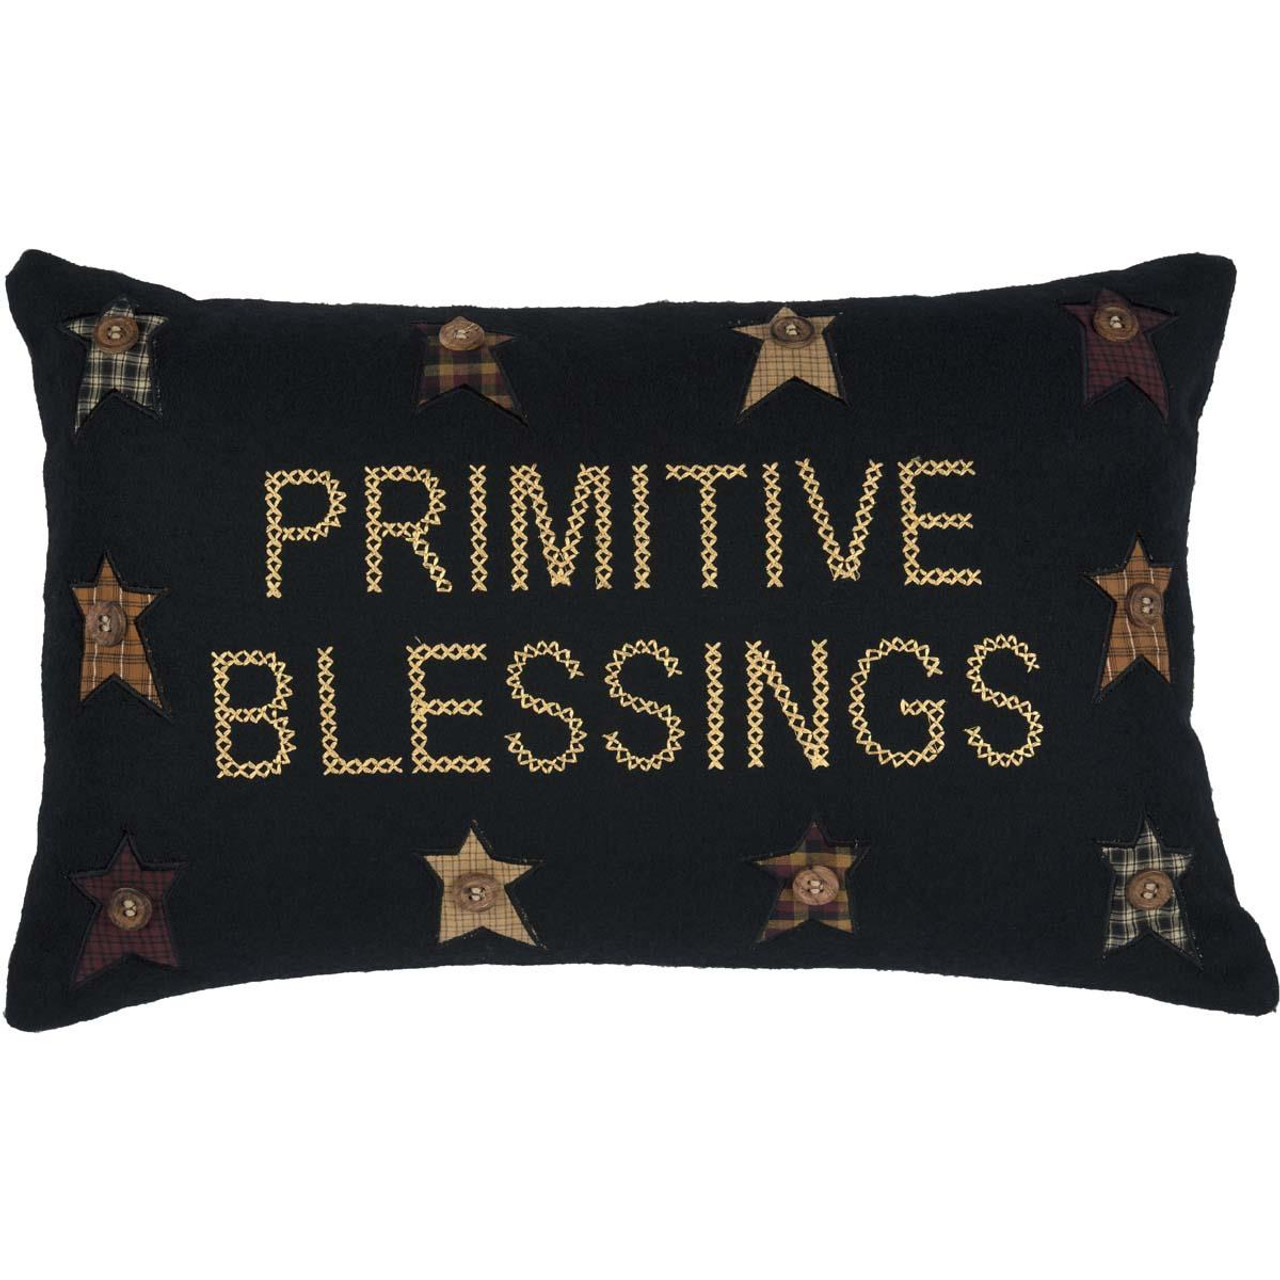 https://cdn11.bigcommerce.com/s-tfdhmk/images/stencil/1280x1280/products/21204/181905/Heritage-Farms-Primitive-Blessings-Pillow-14x22-840528159879_image1__99319.1689081432.jpg?c=2